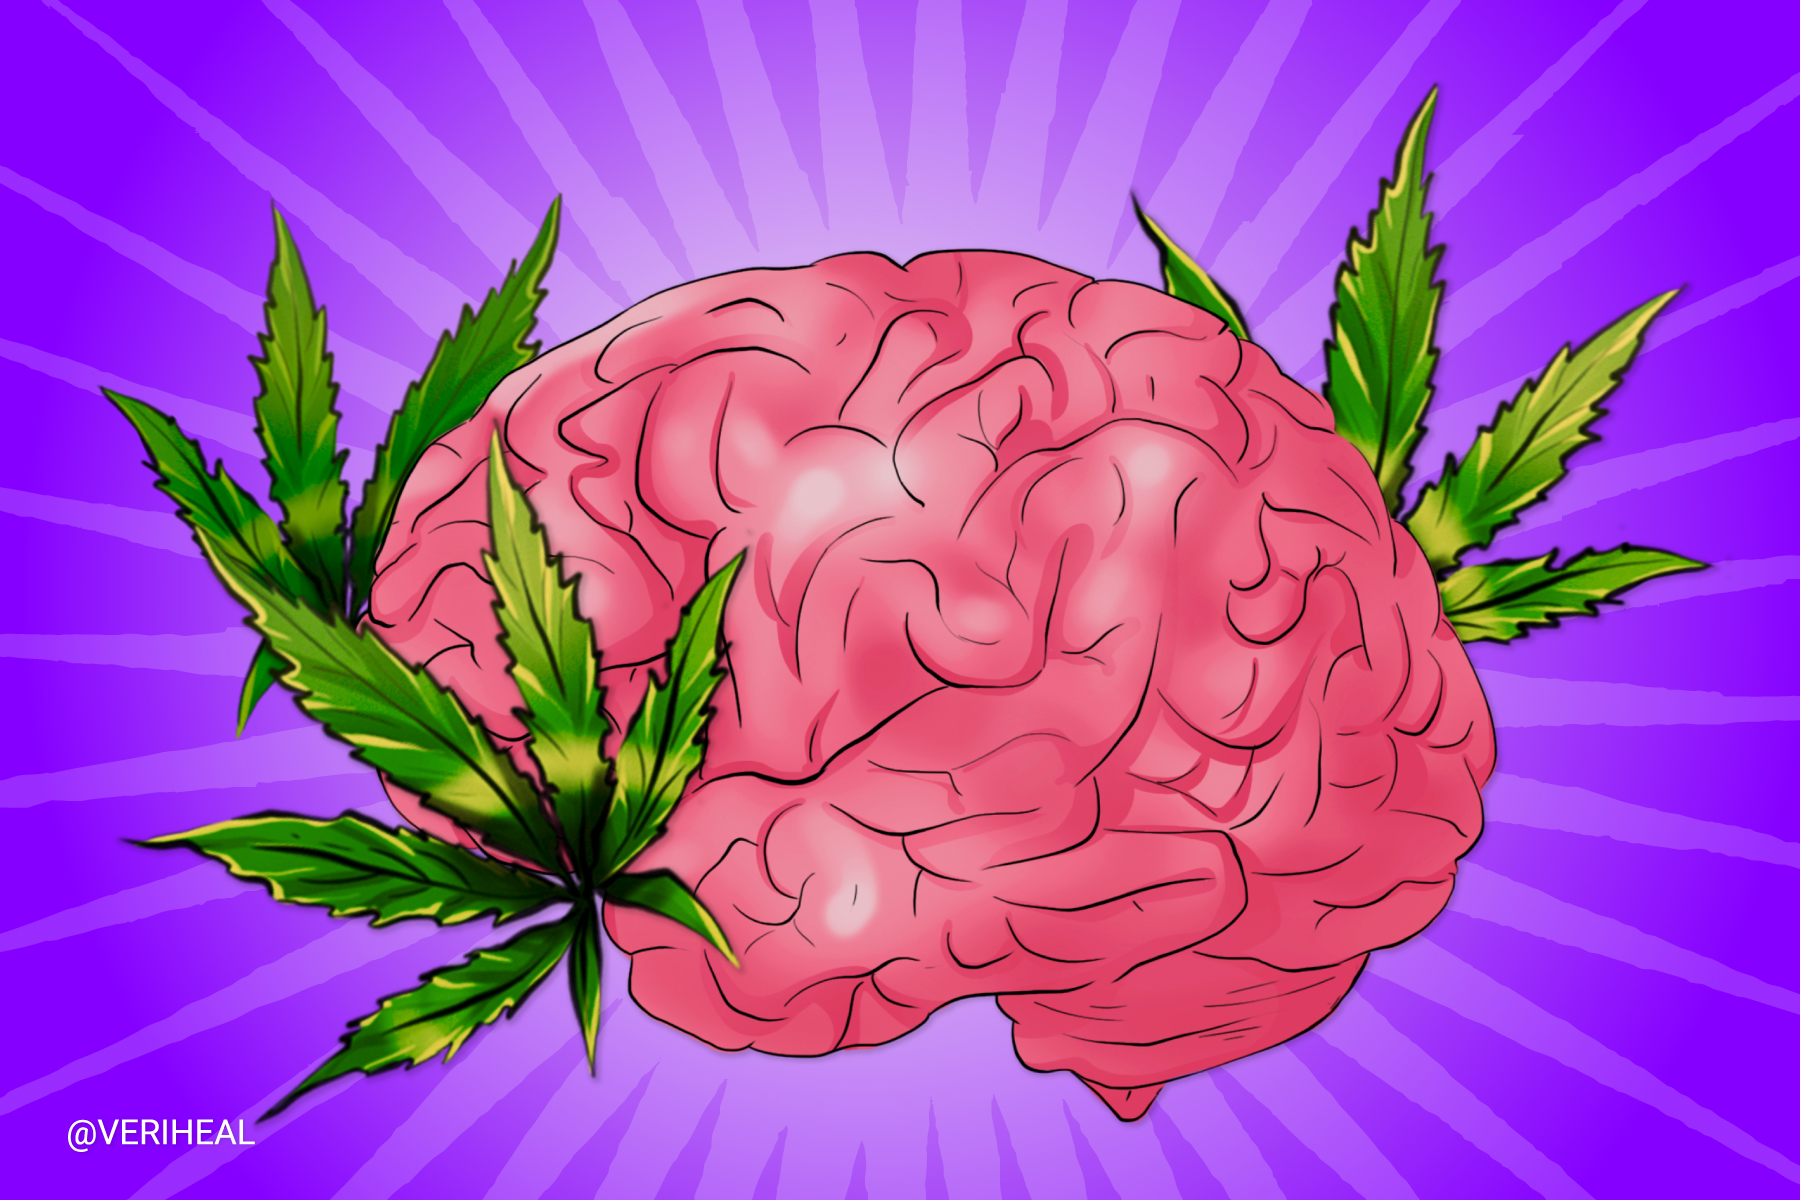 Scientists Say That Cannabis Won’t Reduce Brain Cortical Thickness